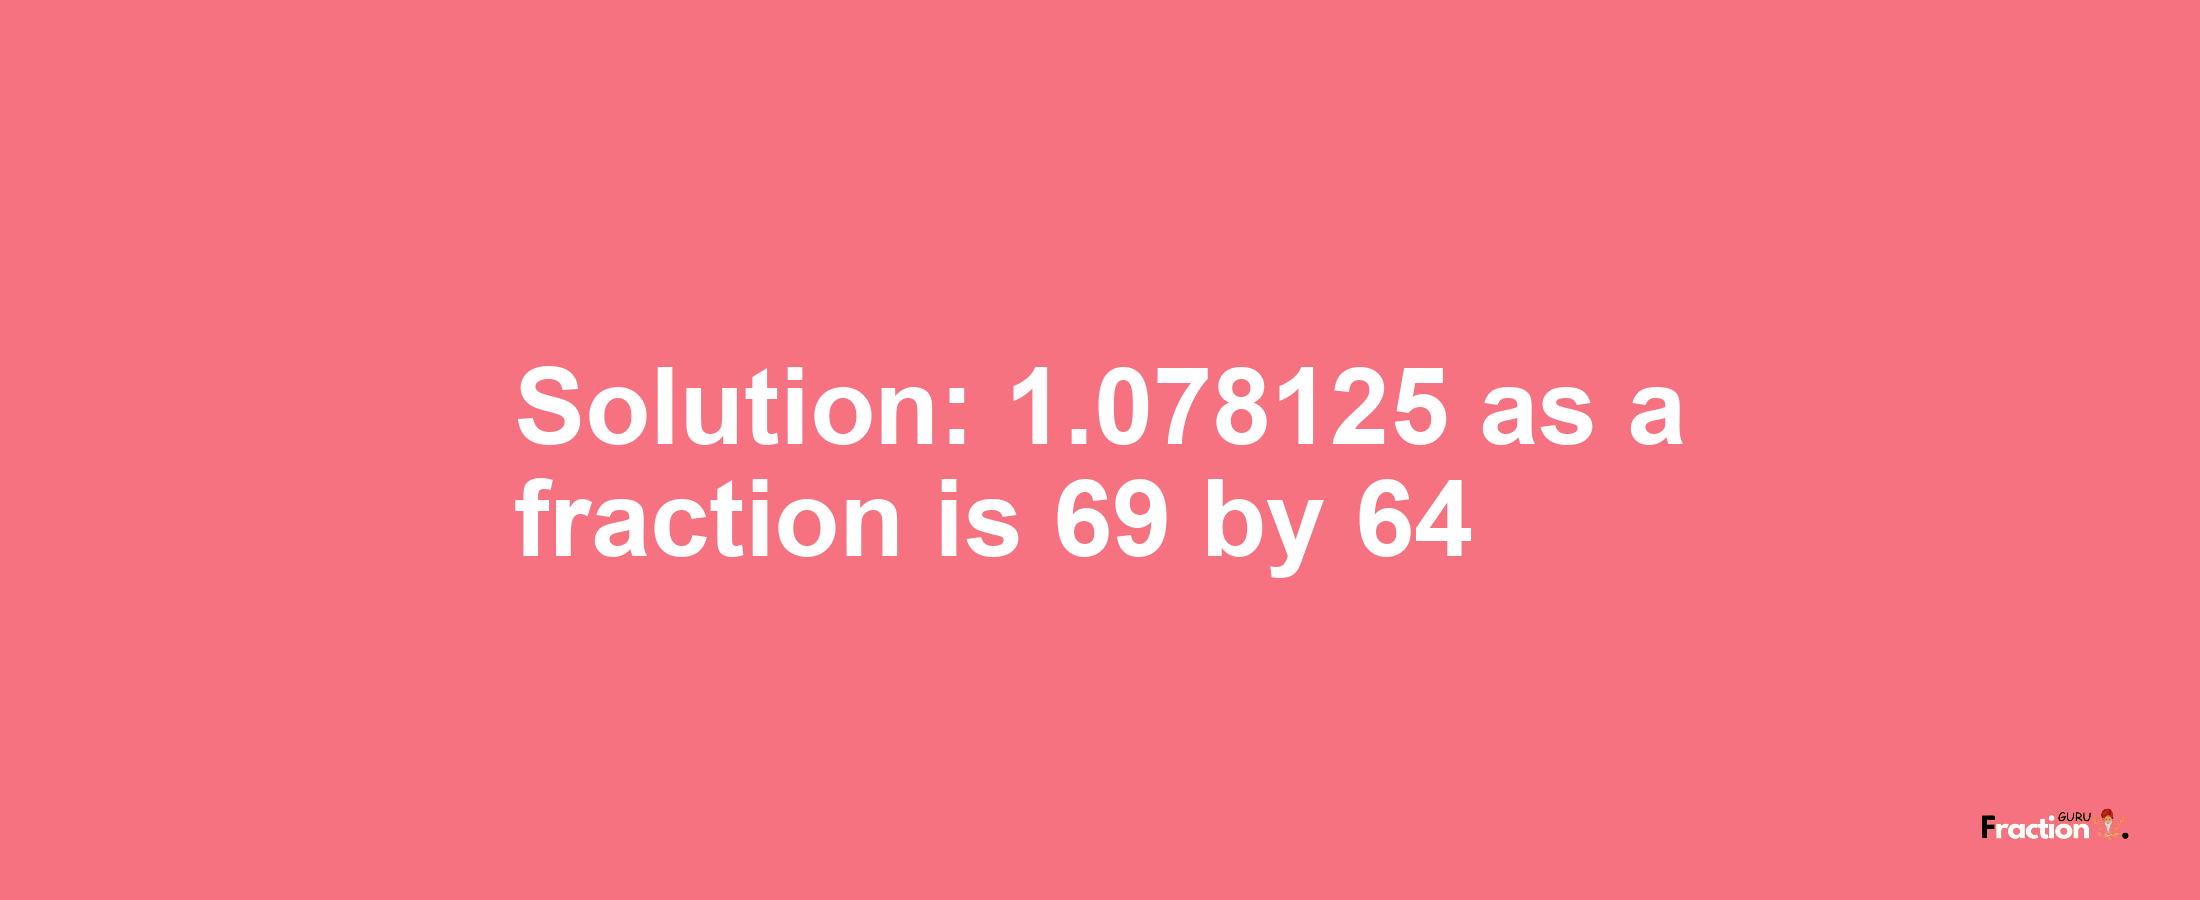 Solution:1.078125 as a fraction is 69/64